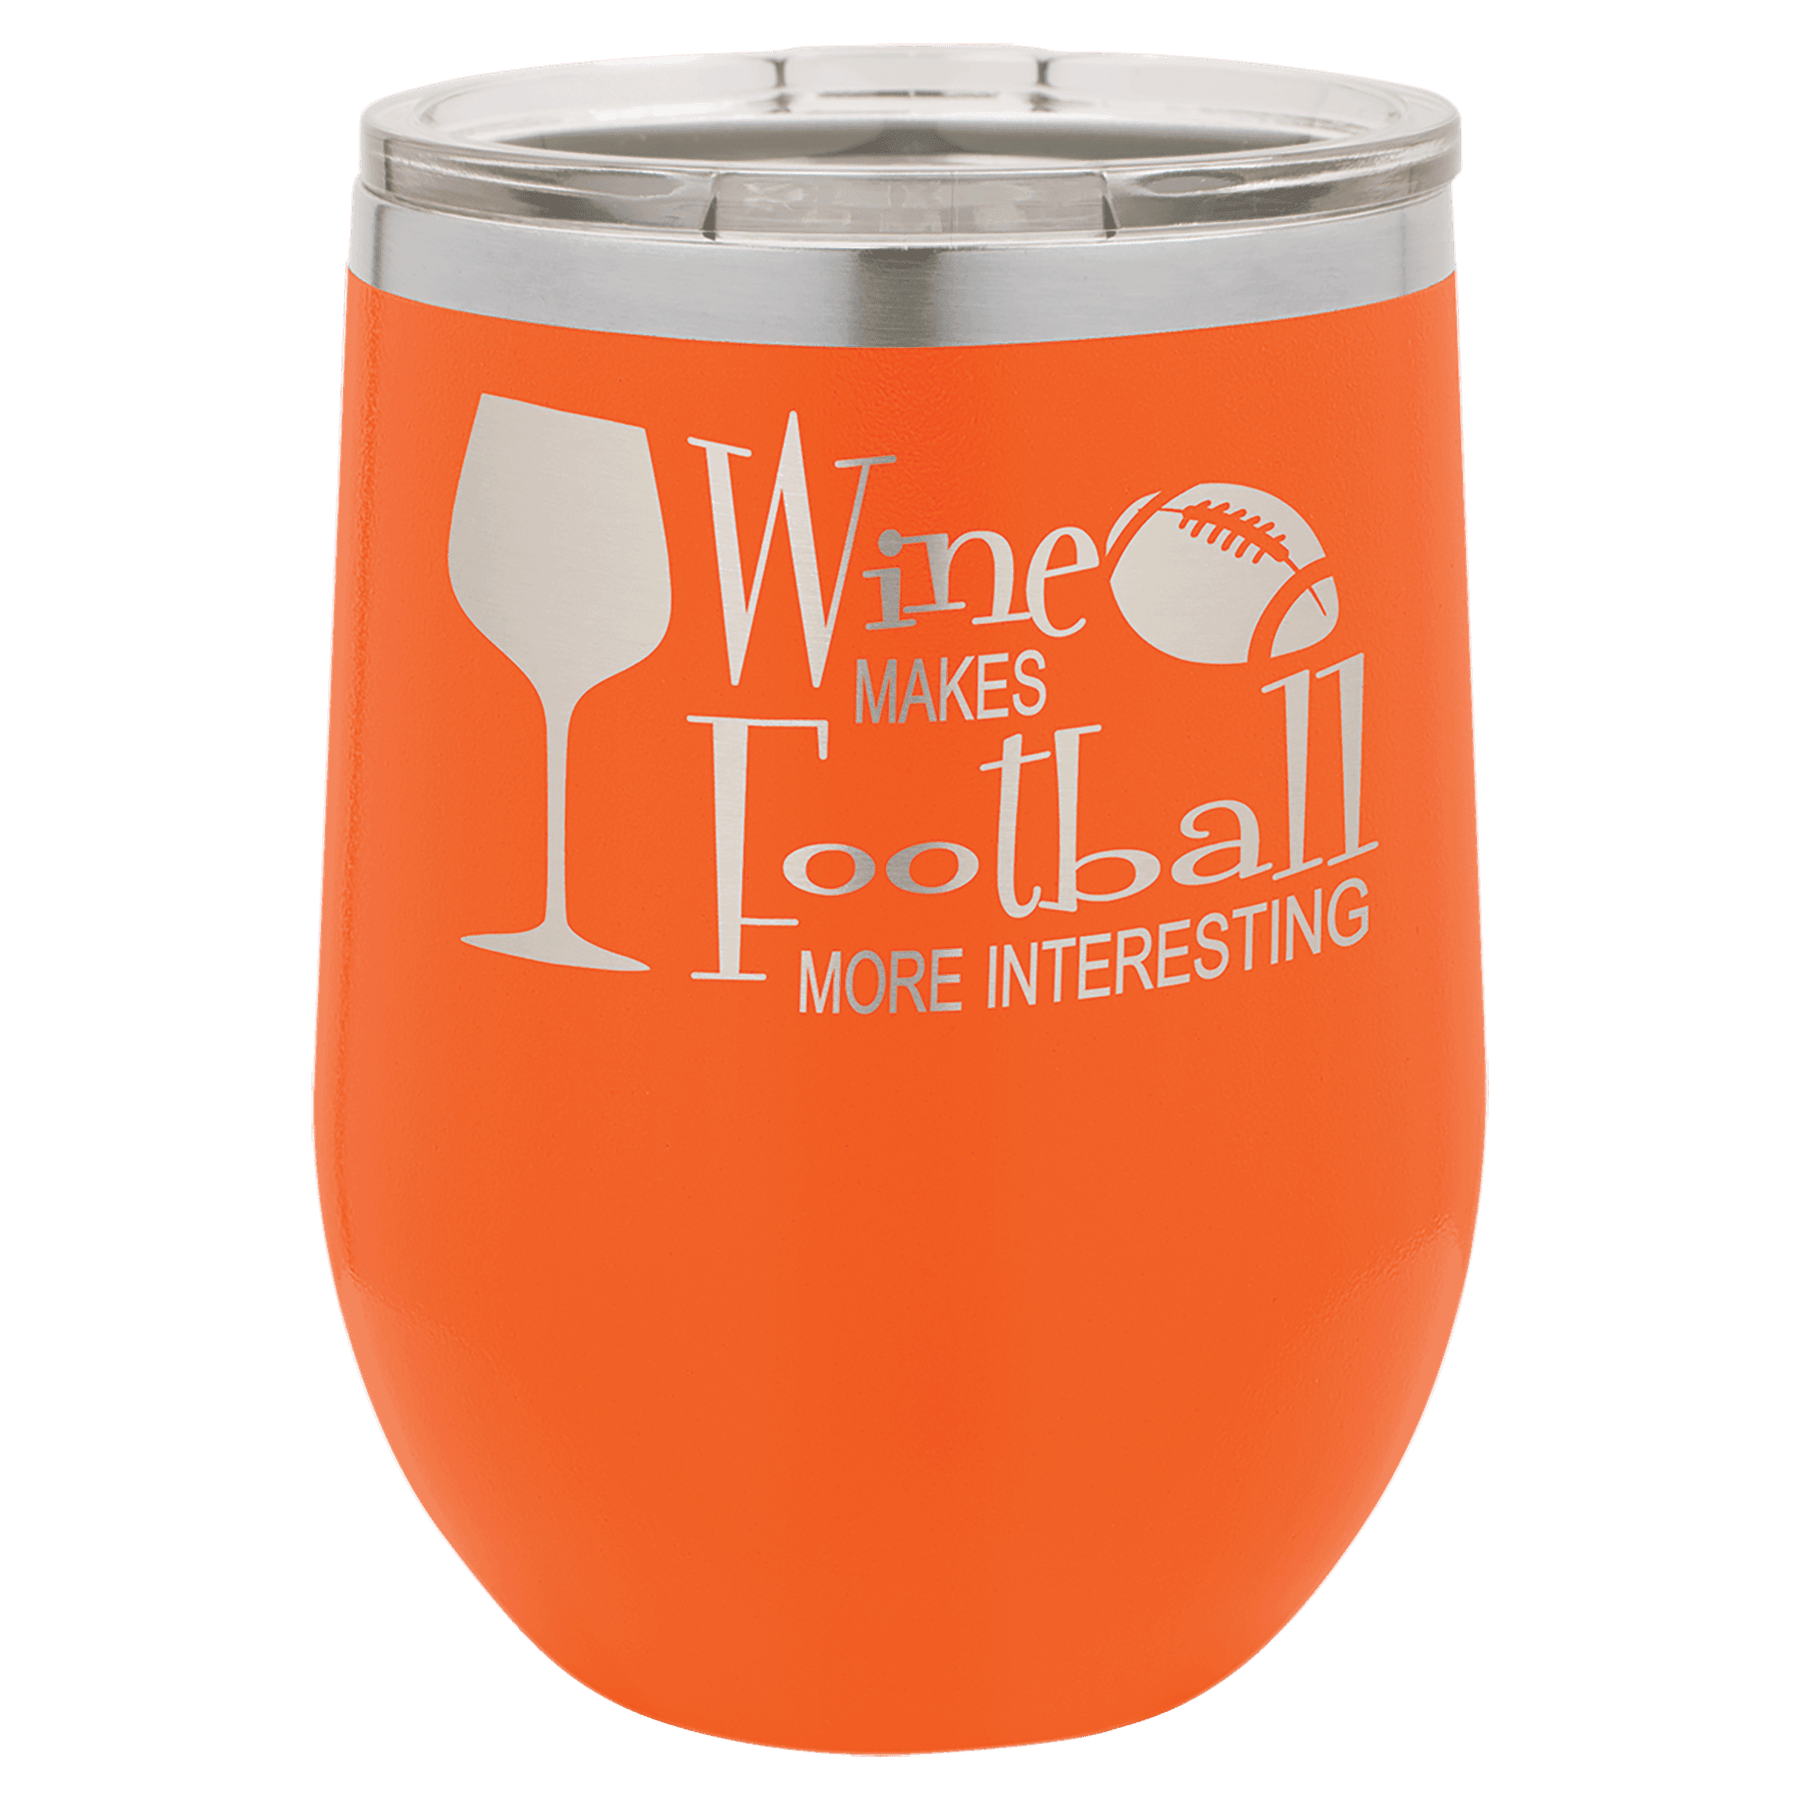 12oz Vacuum Insulated Stemless Wine Tumbler with Custom Engraving by Polar Camel - The Rutile Ltd